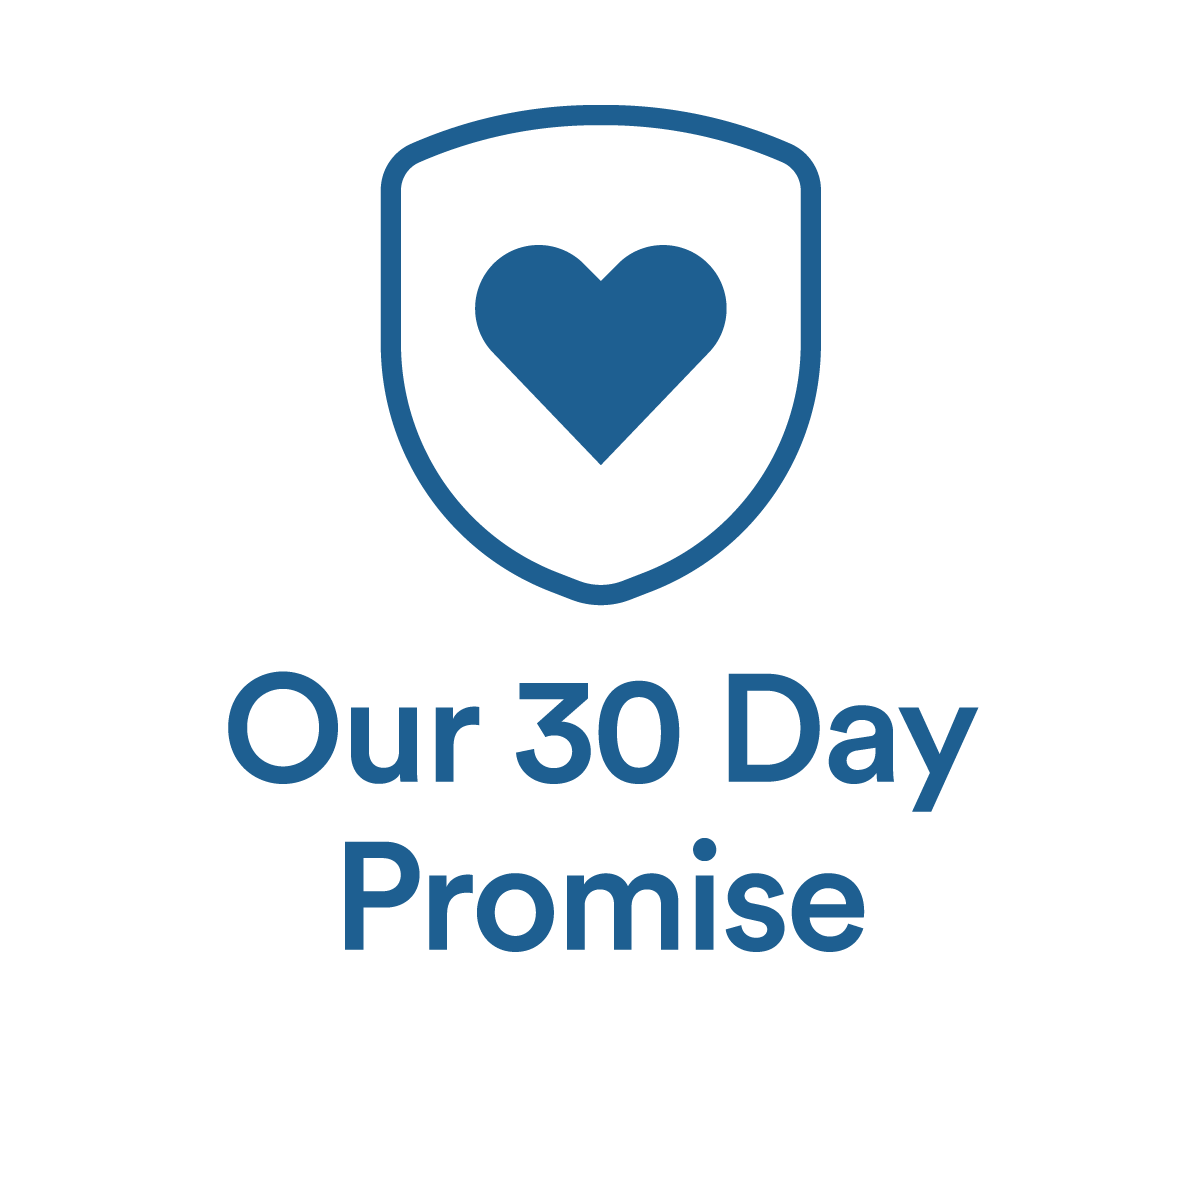 30 Day Promise